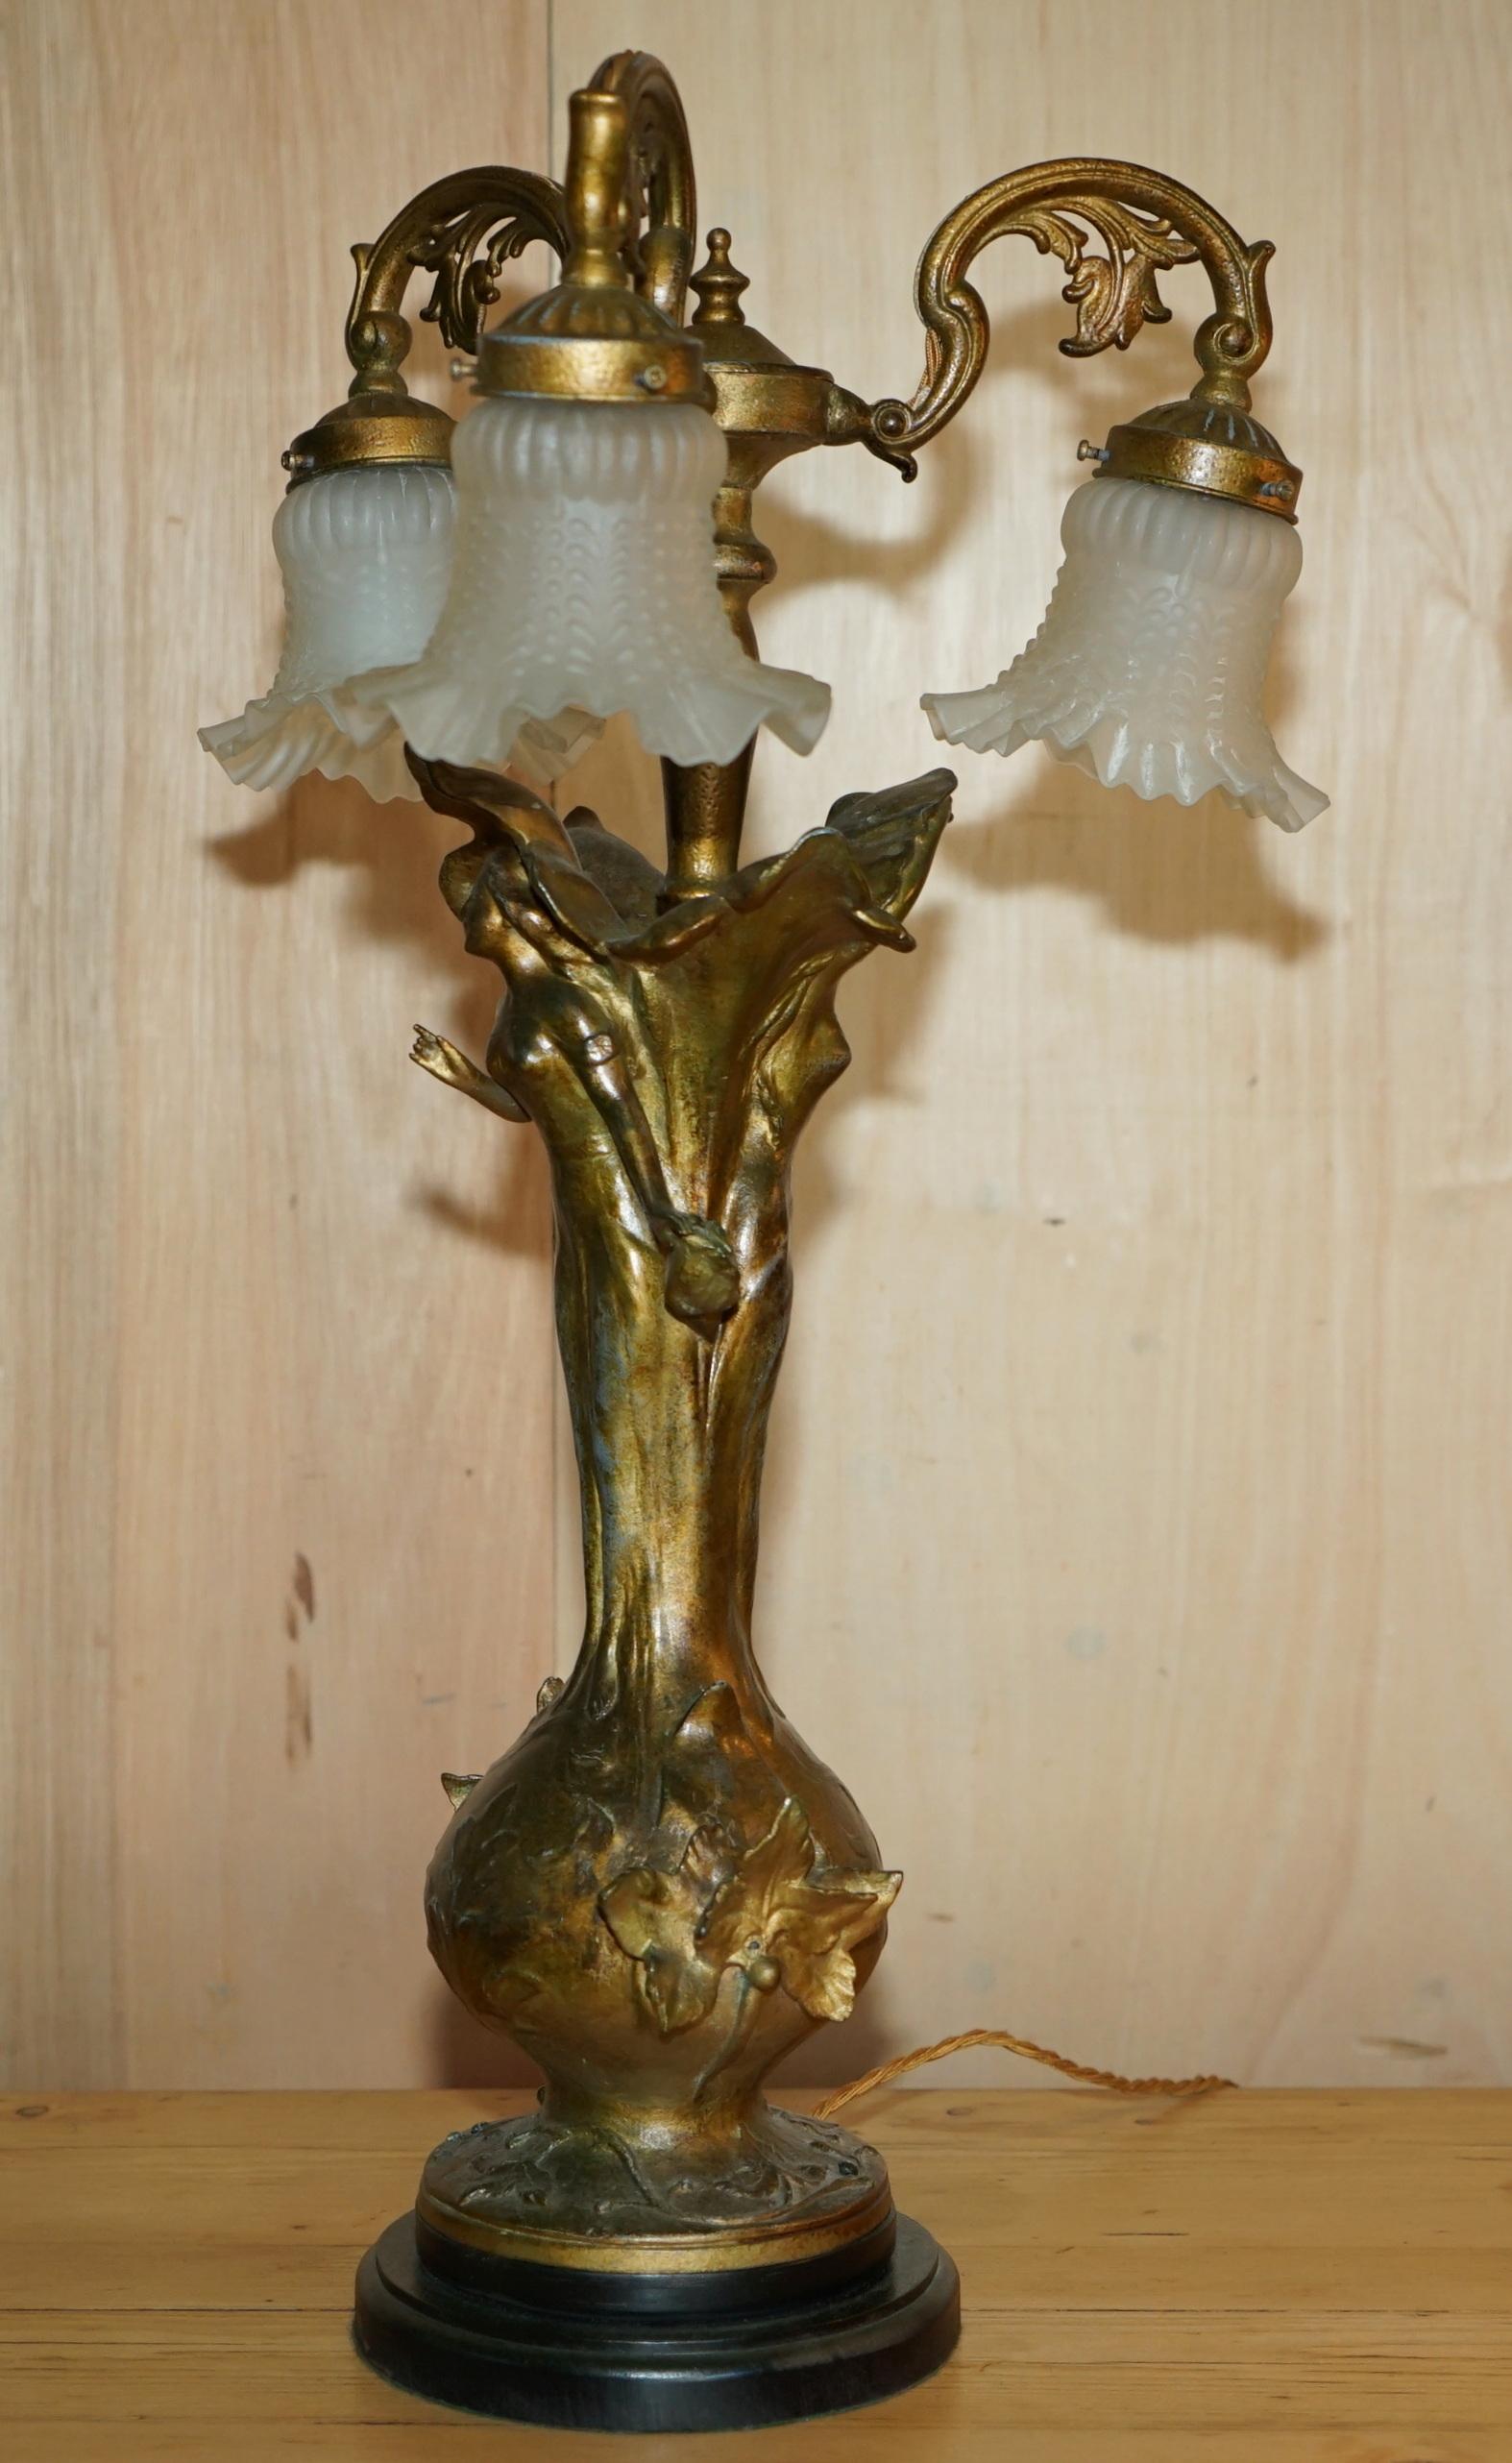 STUNNING PAIR OF LARGE ViNTAGE ART NOUVEAU BRONZED THREE BRANCH TABLE LAMPS For Sale 5